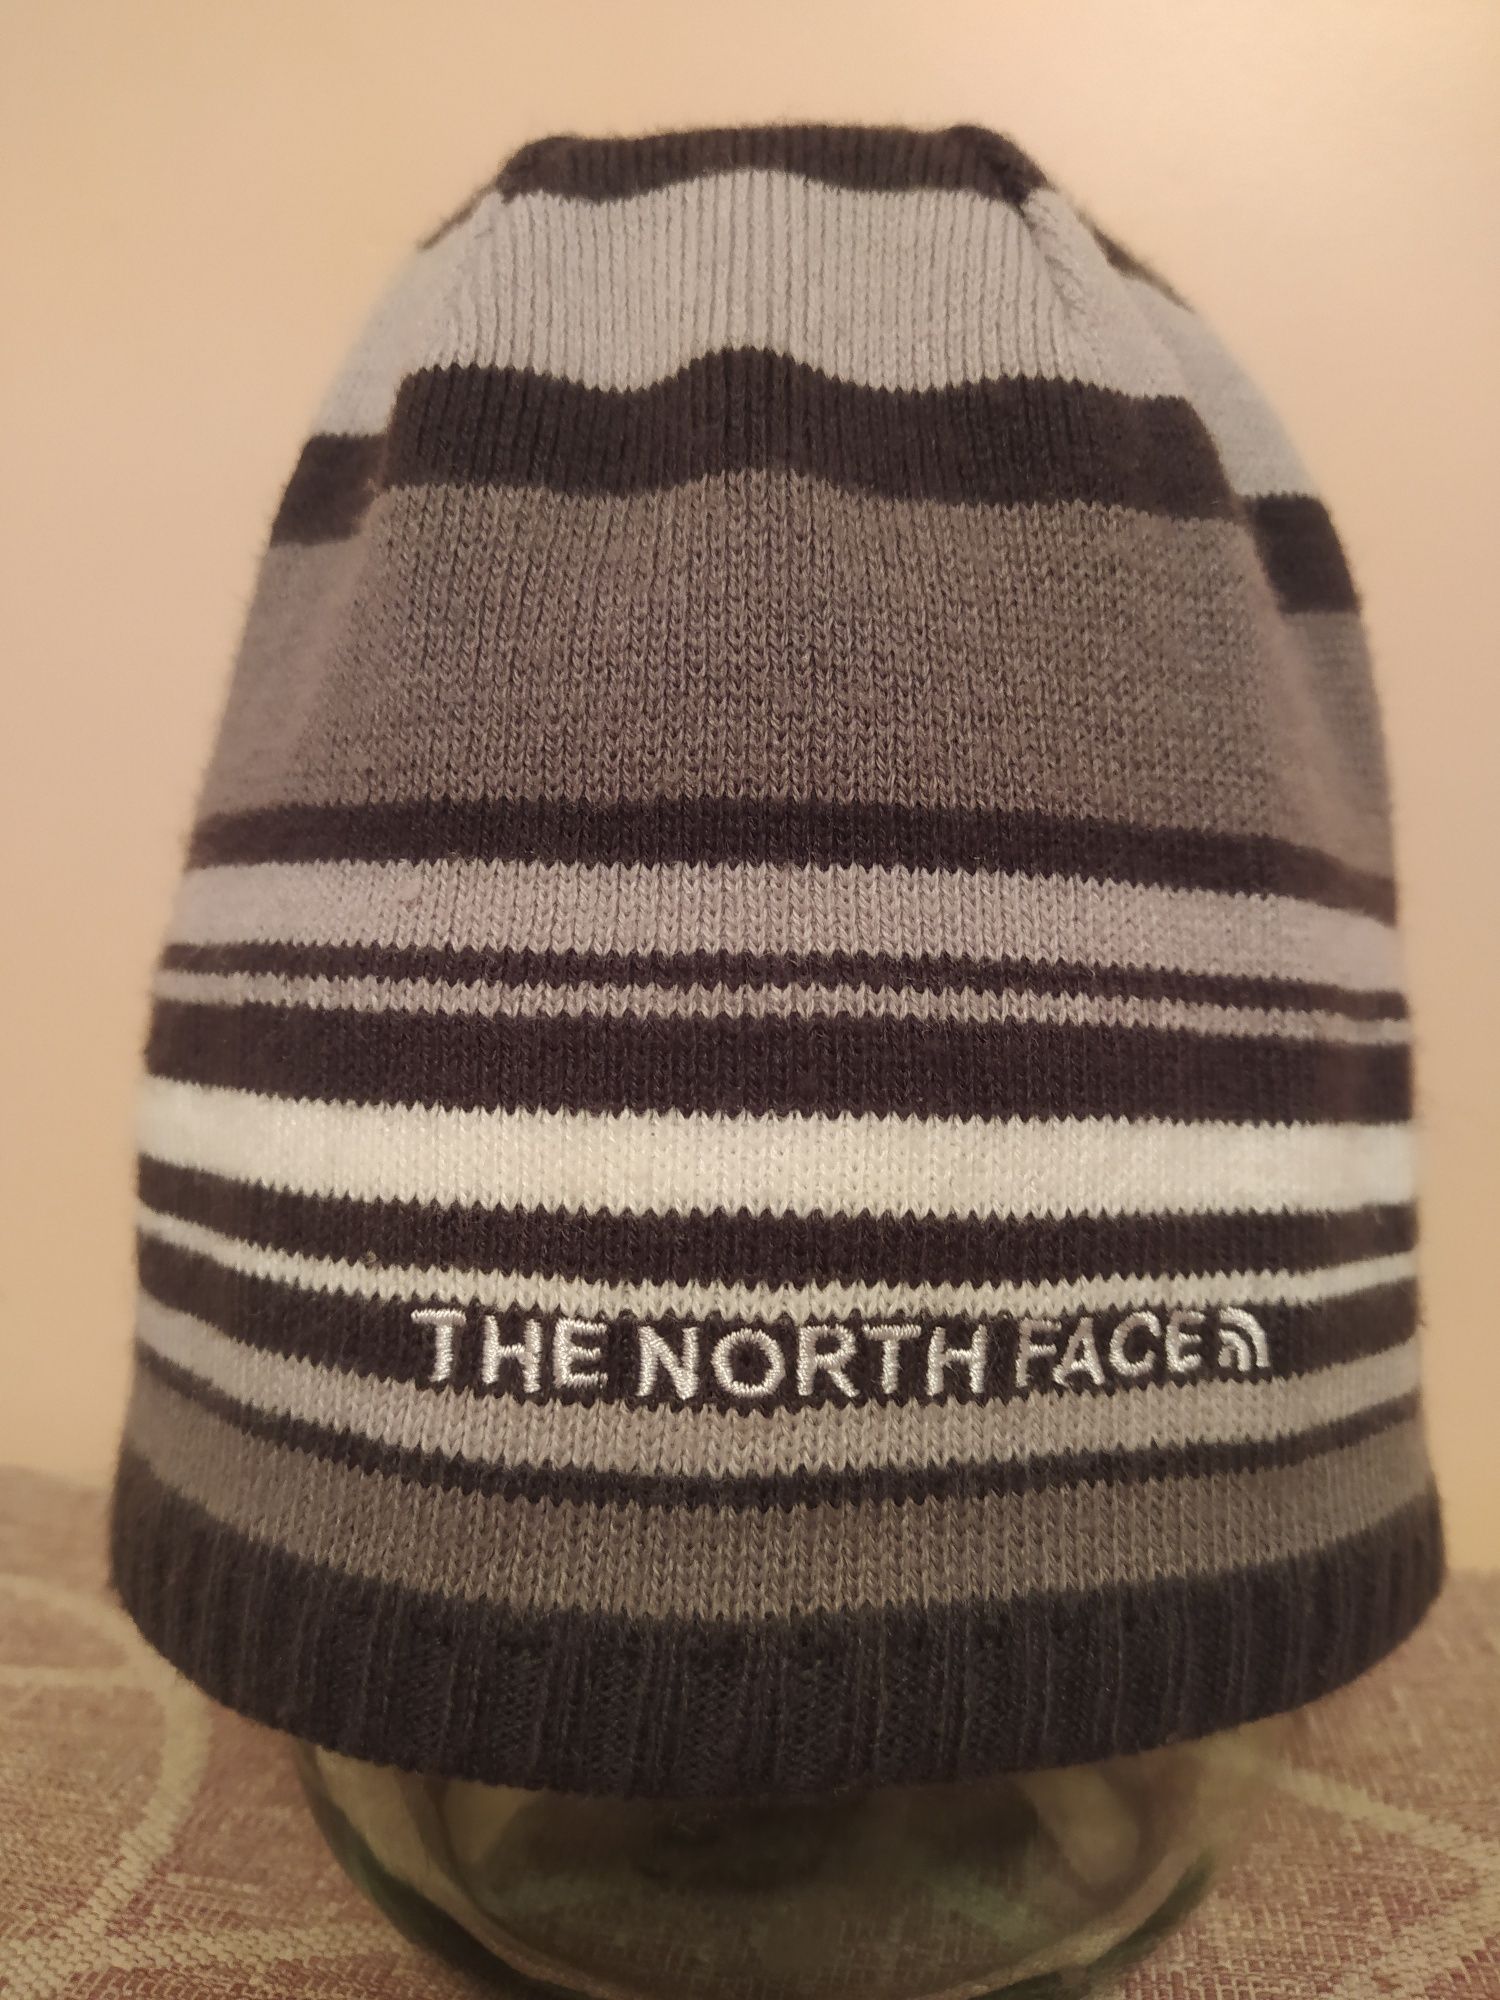 The North Face шапка.  Стан ідеал.